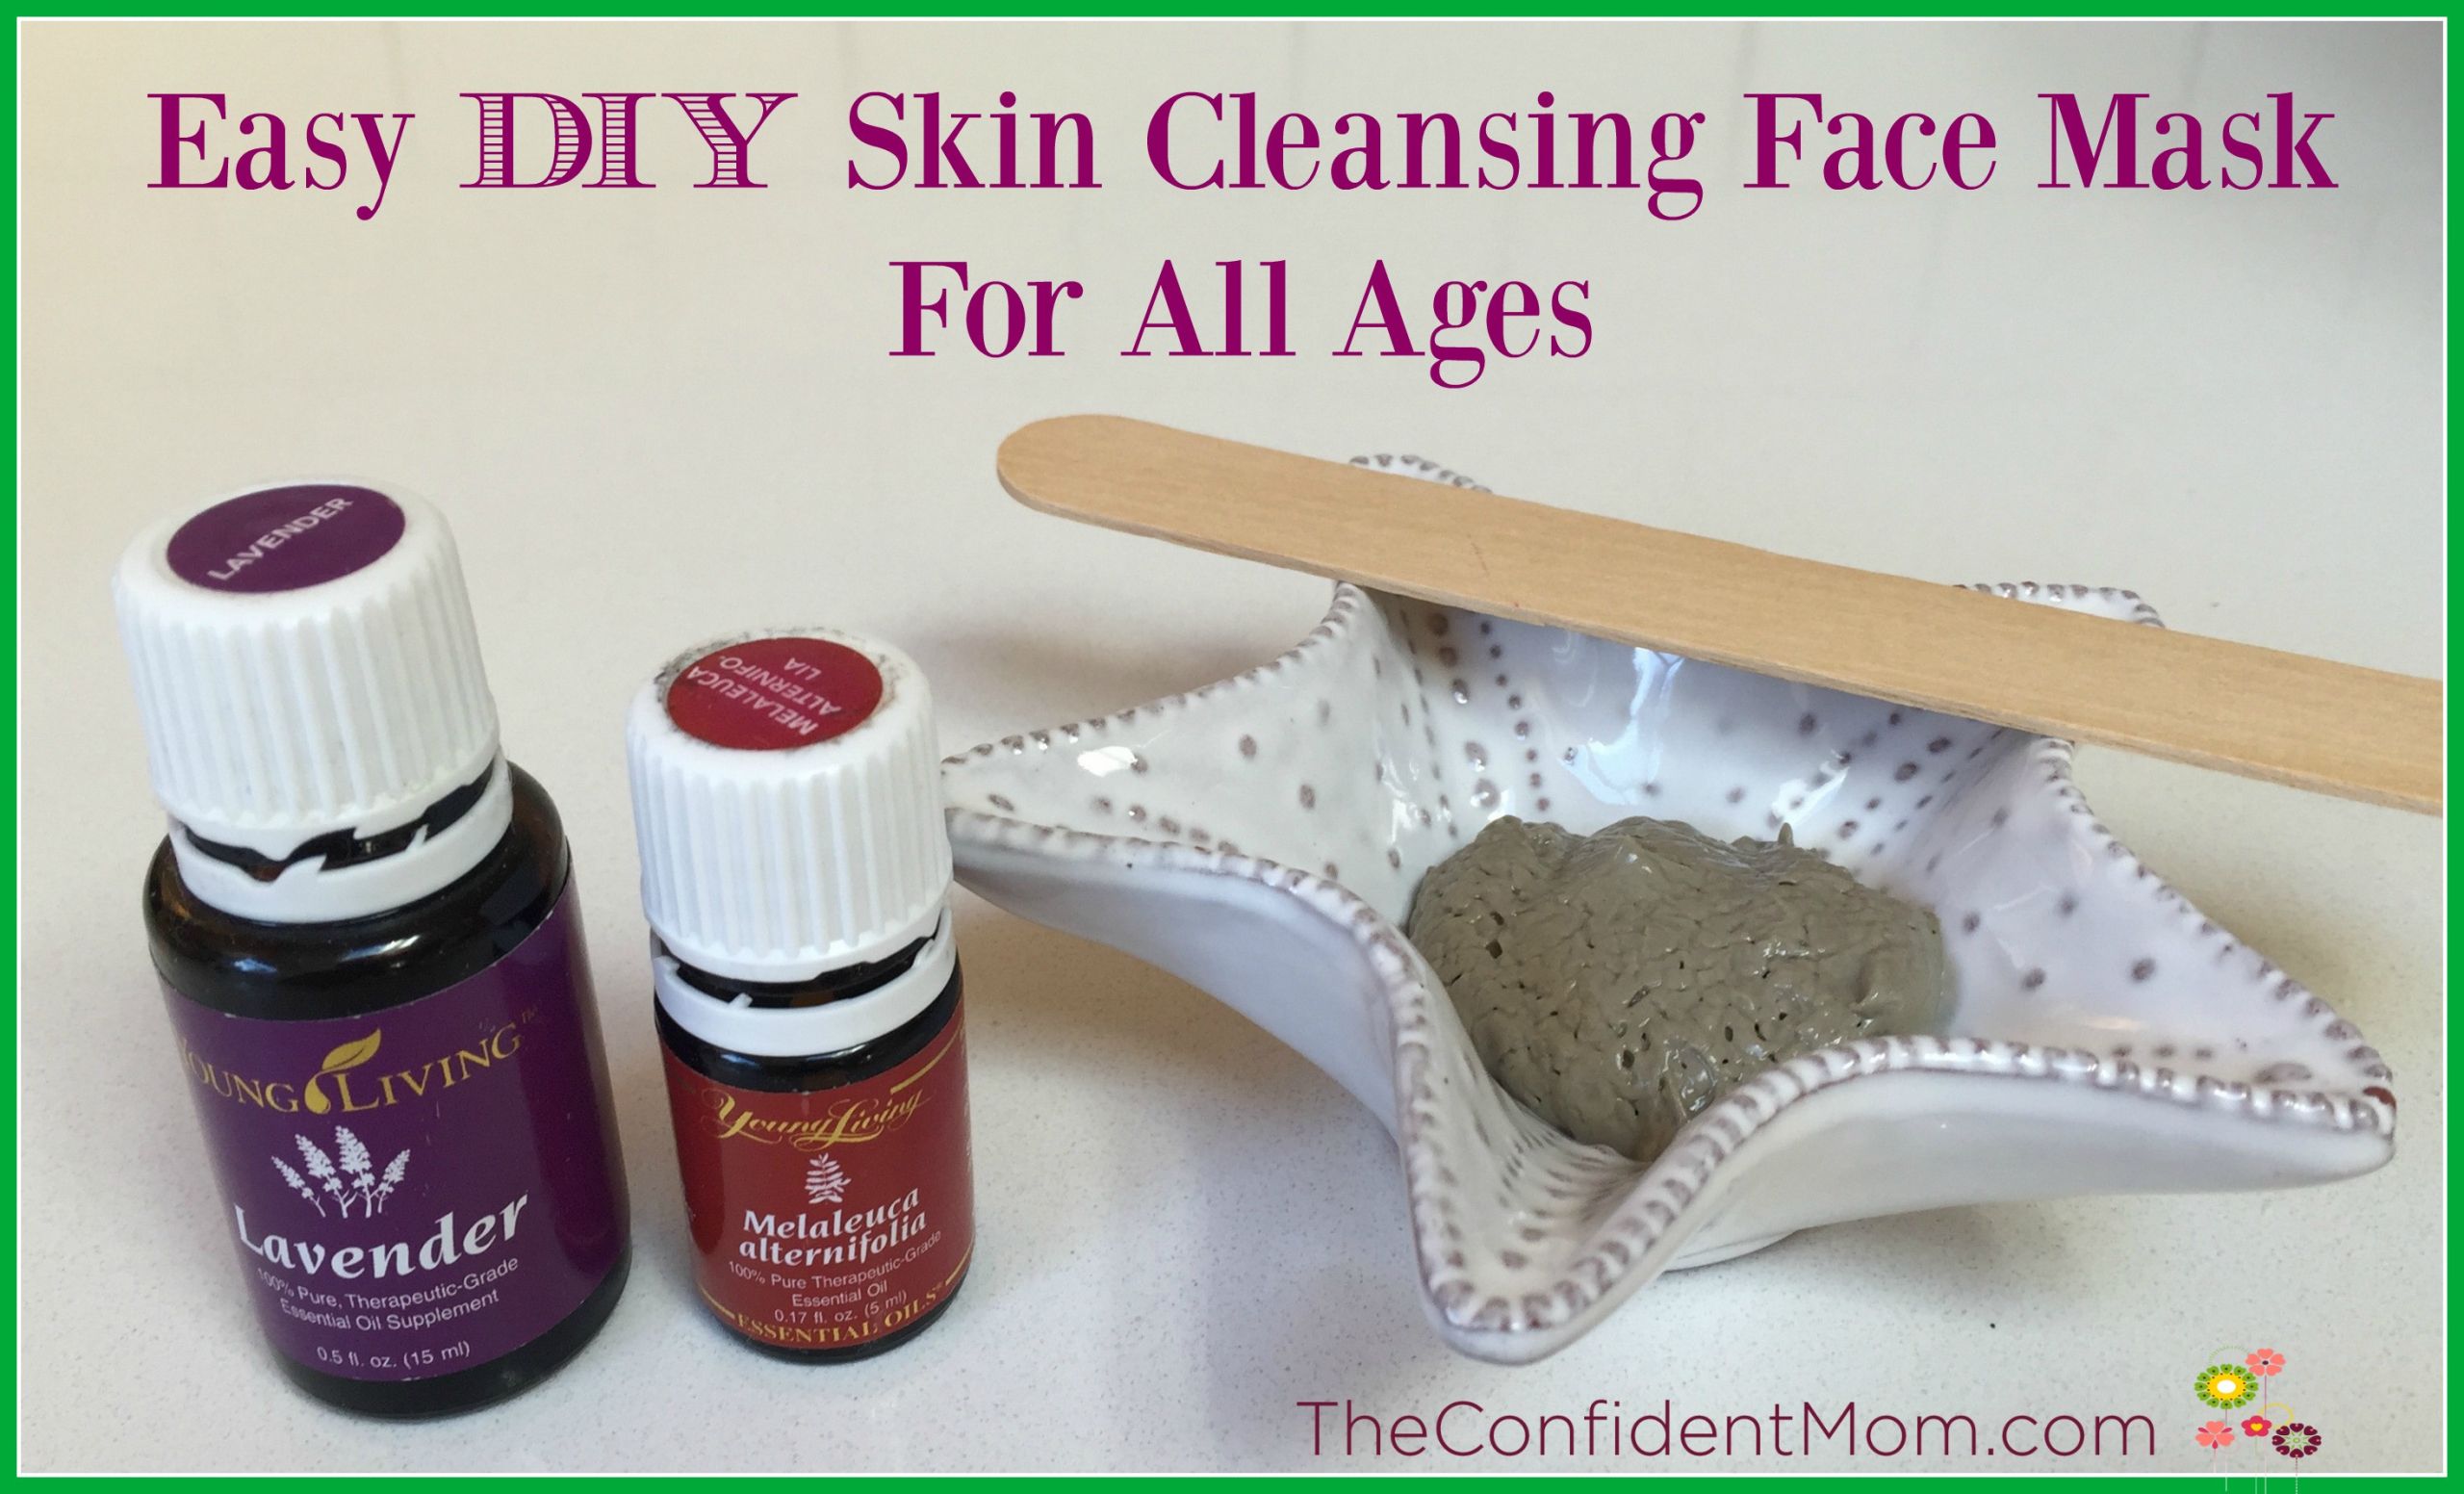 DIY Cleansing Face Mask
 Easy DIY Skin Cleansing Face Mask for All Ages The